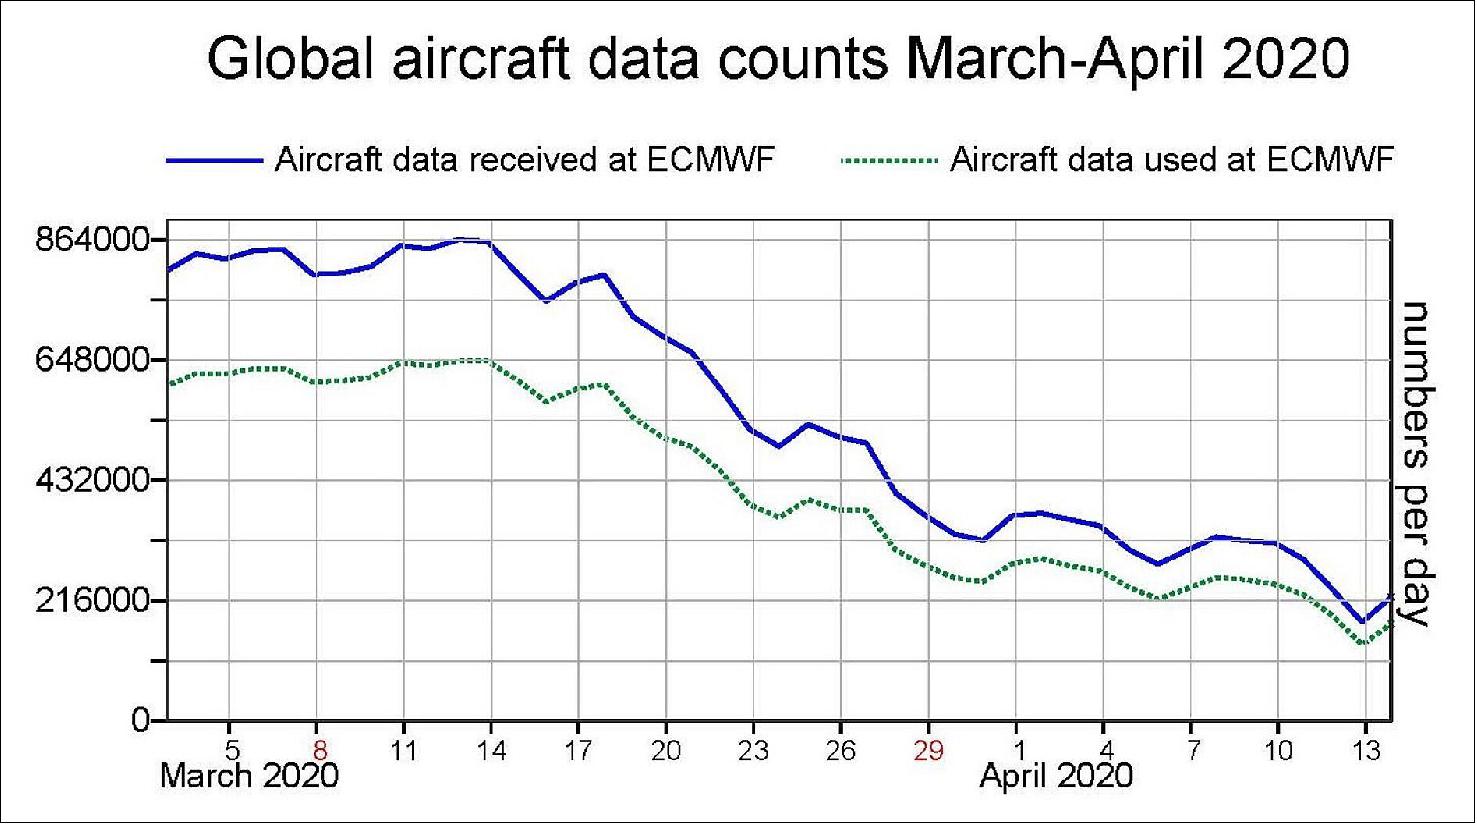 Figure 25: The data counts of aircraft weather data received at ECMWF from 3 March to 14 April 2020. The dramatic reduction relates to reduced air traffic due to COVID-19 (image credit: ECMWF)